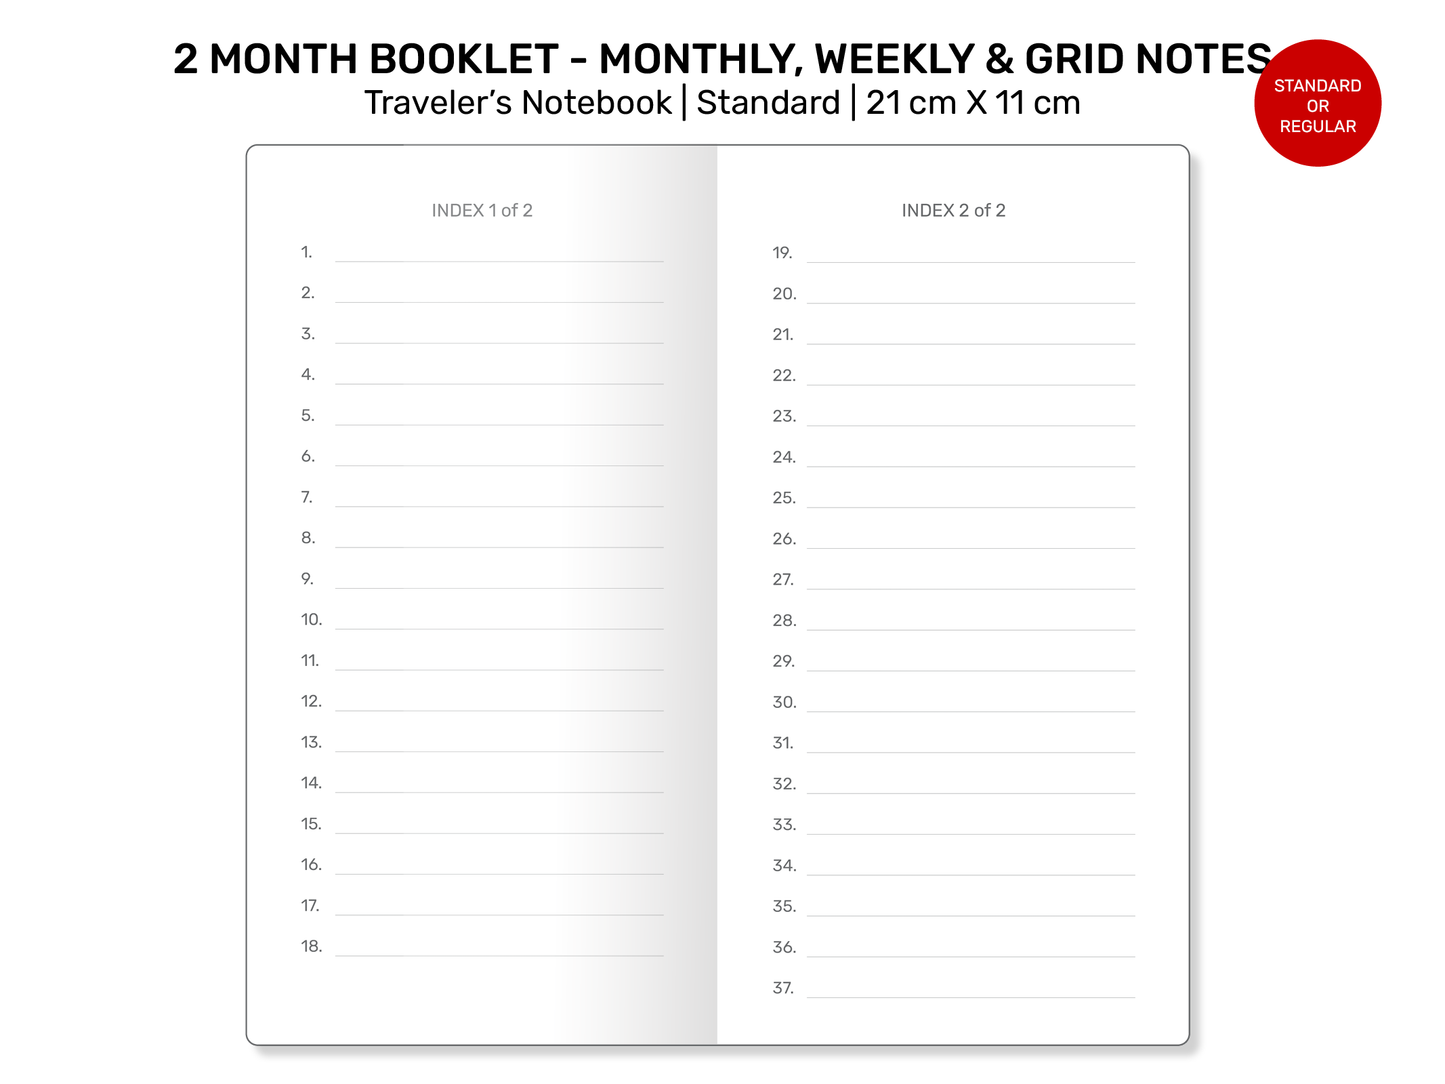 Standard TN 2-MONTH Booklet - Monthly, Weekly, Index, Grid Notes Printable Traveler's Notebook Insert Refill Grid - RTN043V2